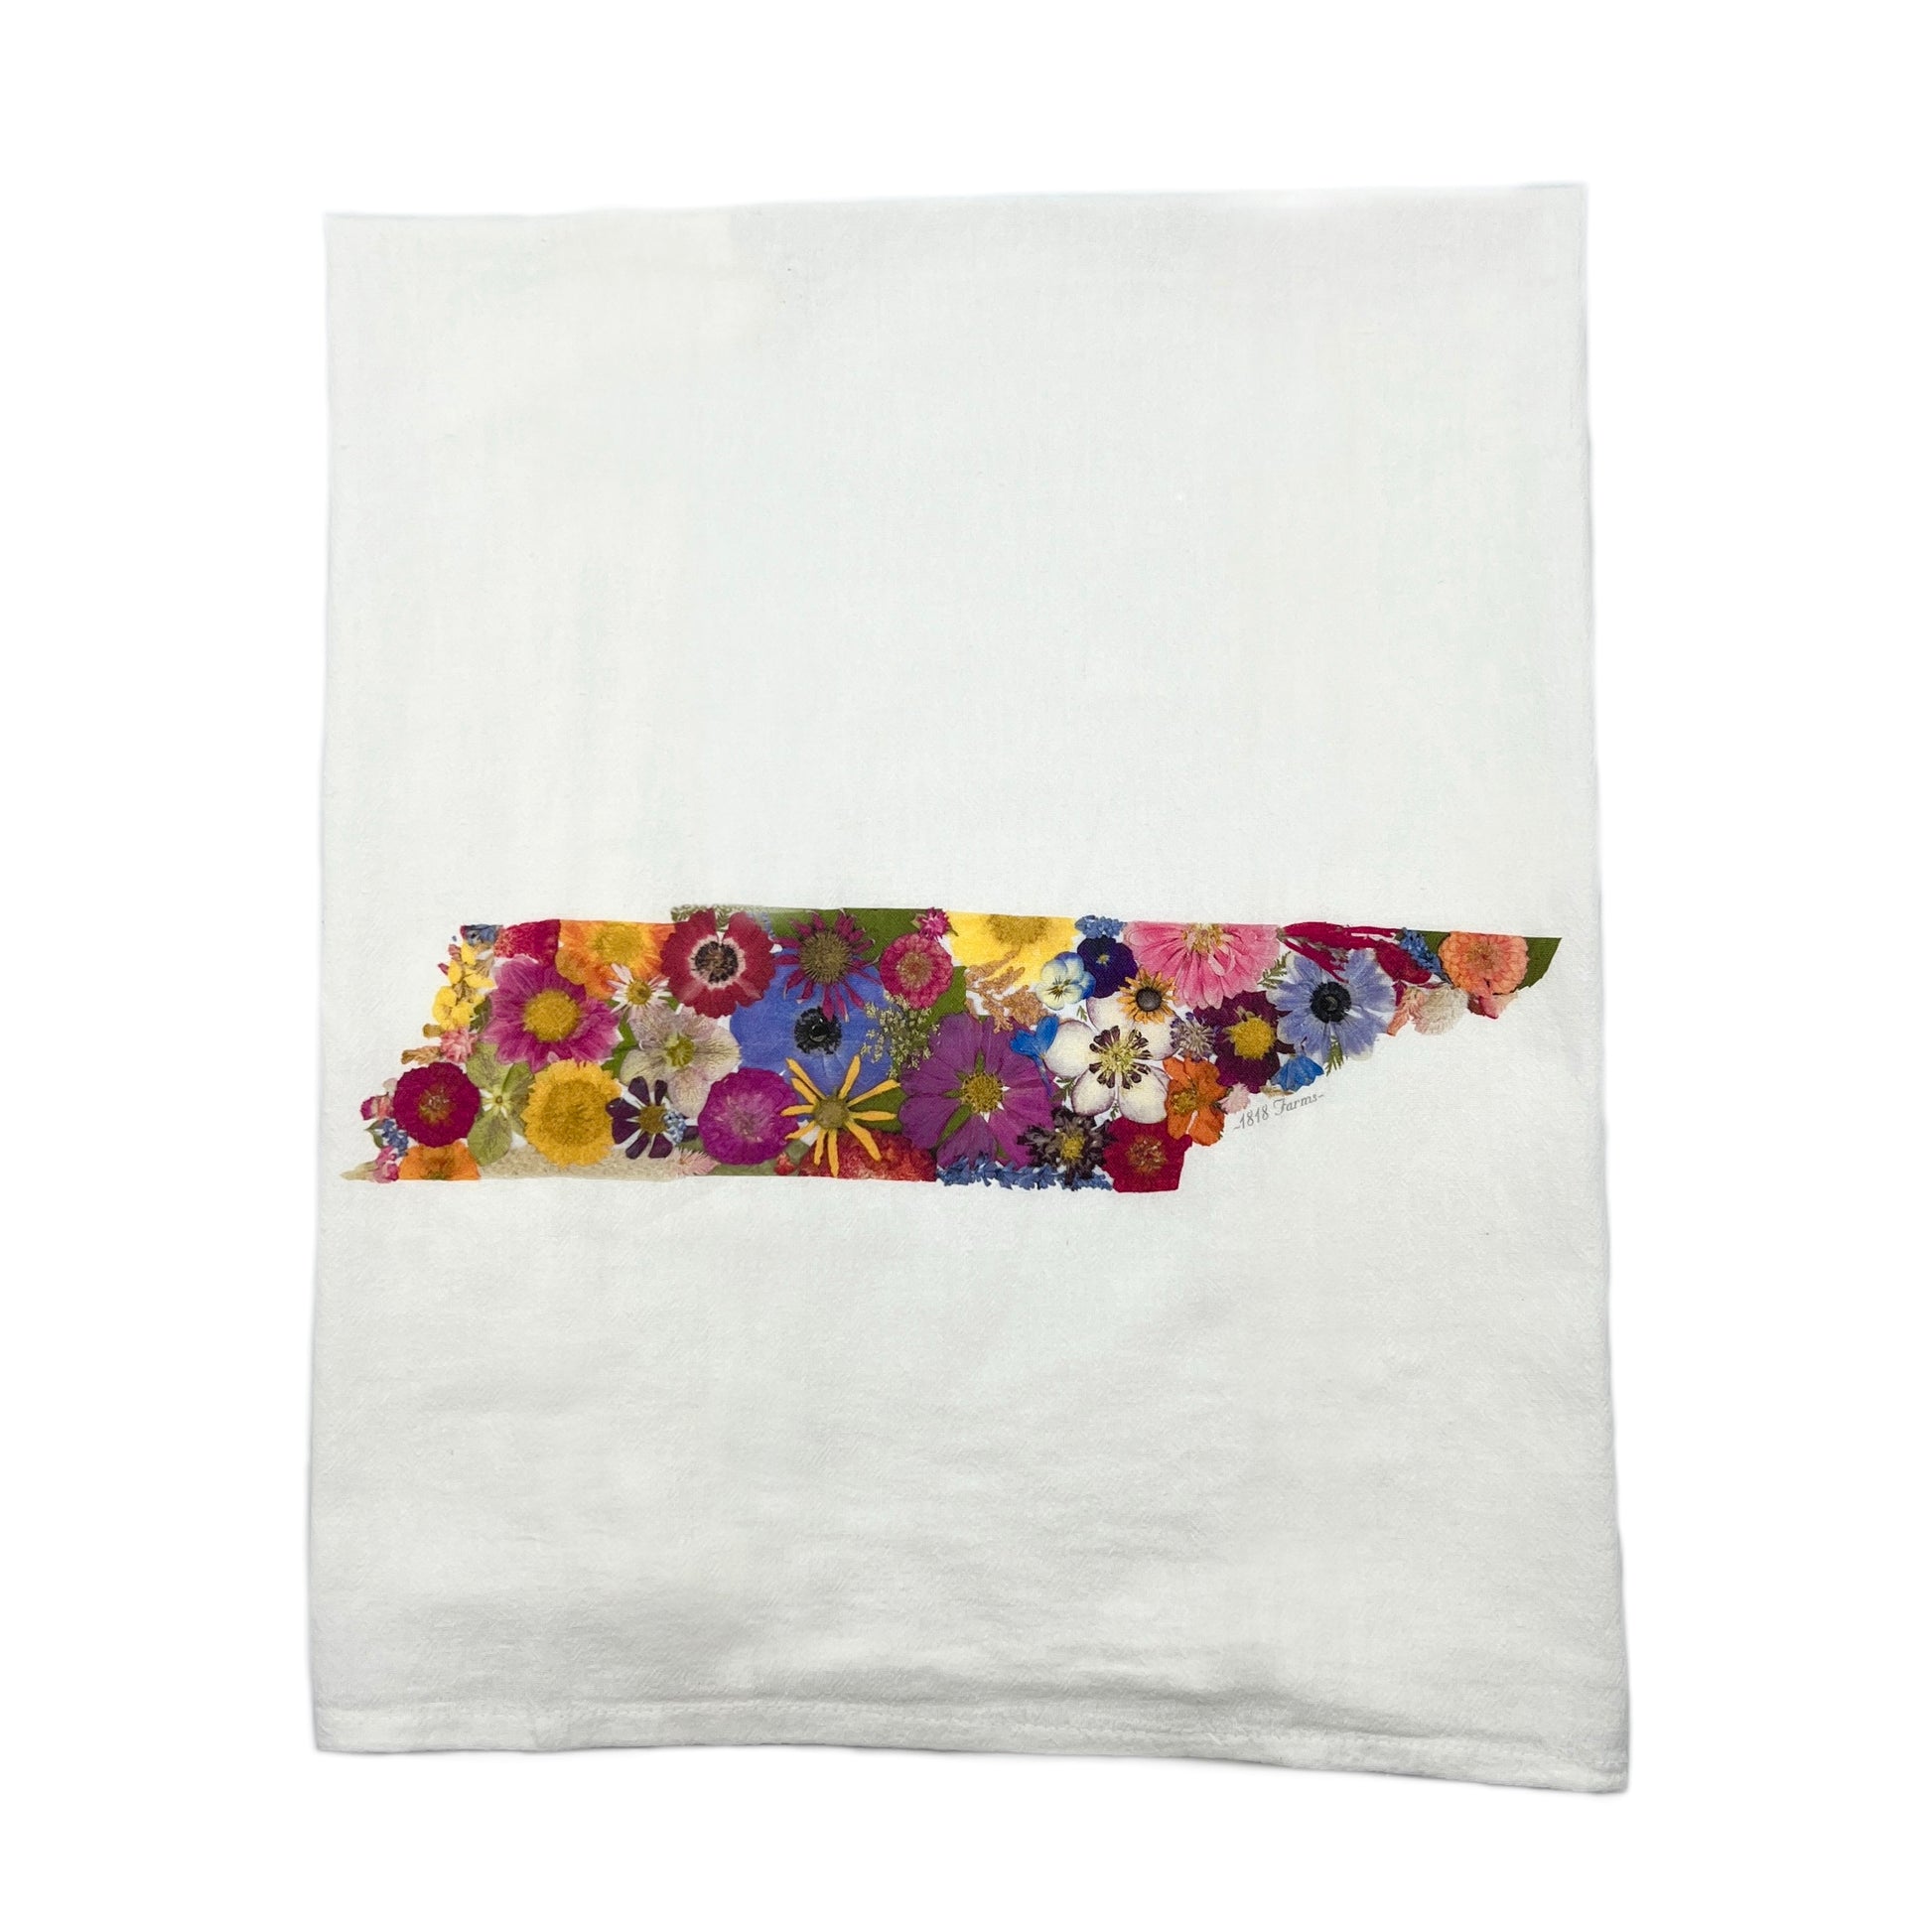 State Themed Flour Sack Towel  - "Where I Bloom" Collection Towel 1818 Farms Tennessee  